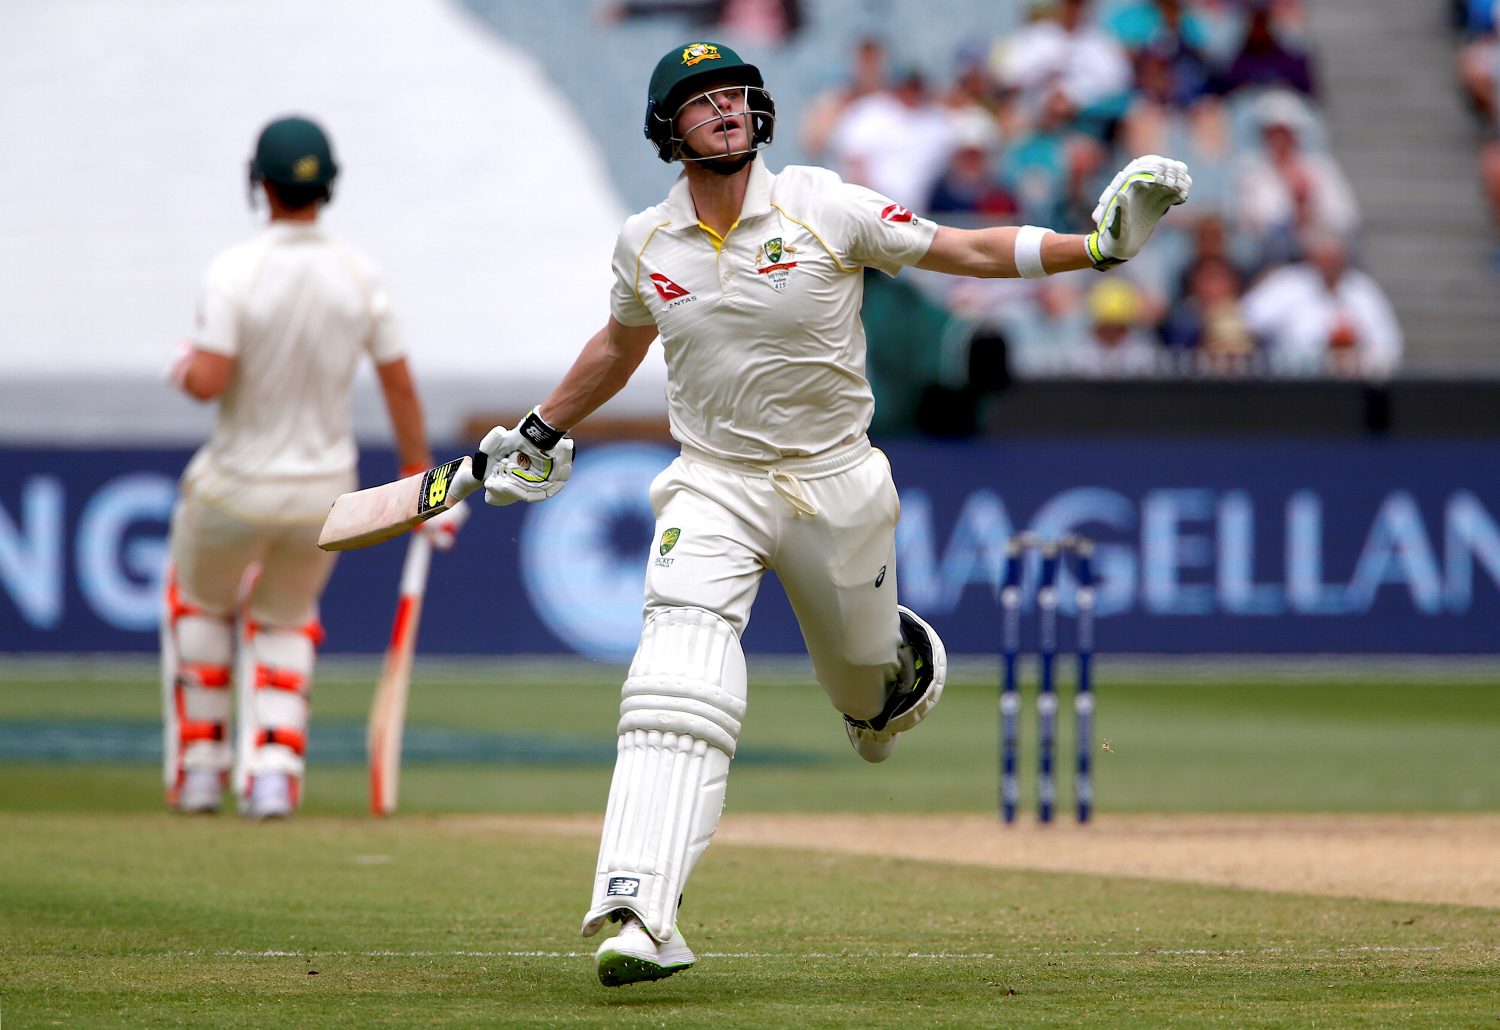 Australia’s captain Steve Smith reacts after he was hit by the ball running between wickets during the fifth day of the fourth Ashes cricket test match. REUTERS/David Gray